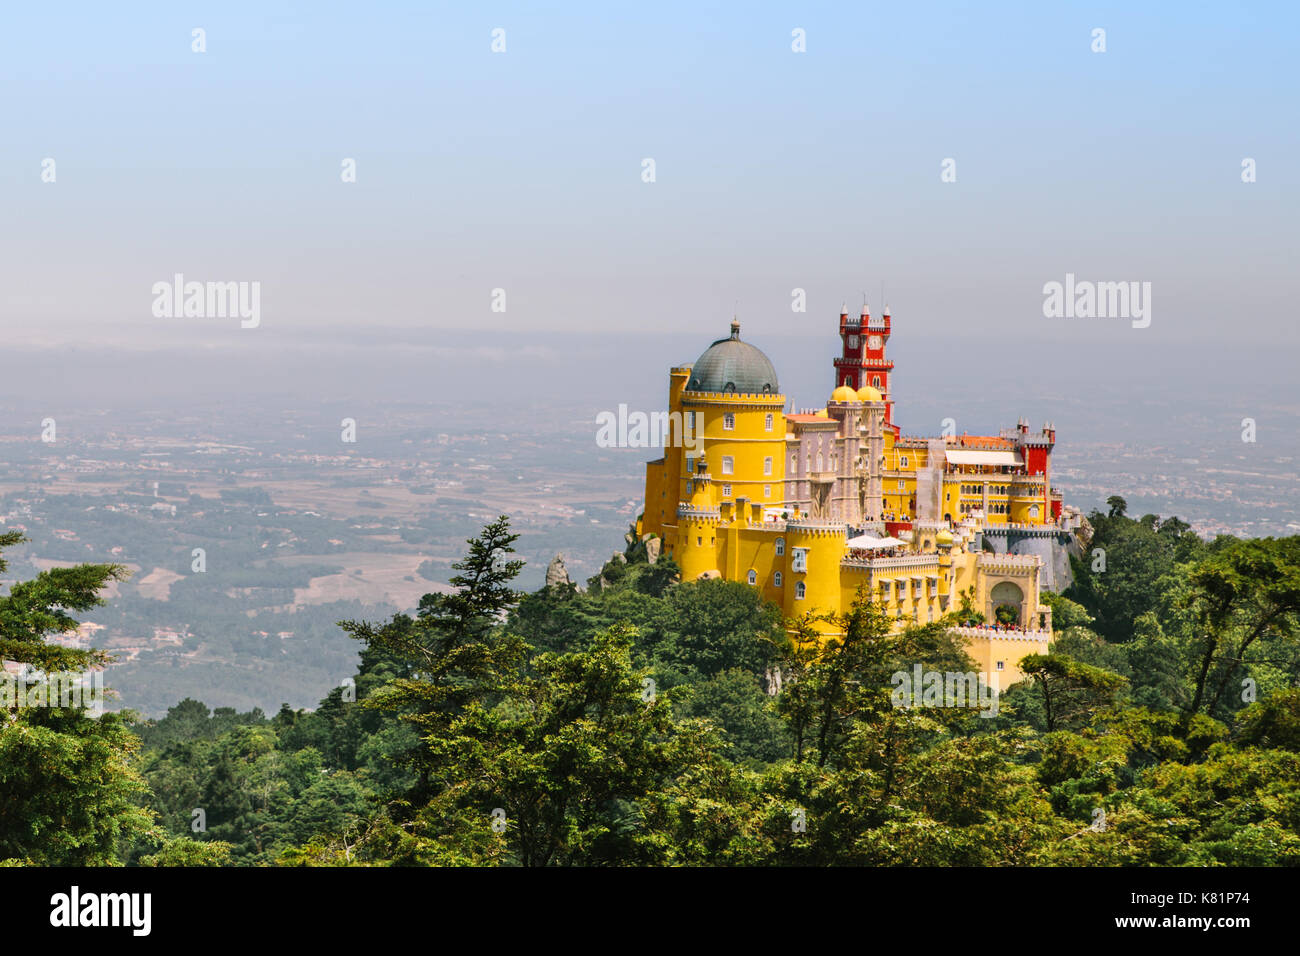 Sintra Pena Palace viewed from the top of the montain Stock Photo